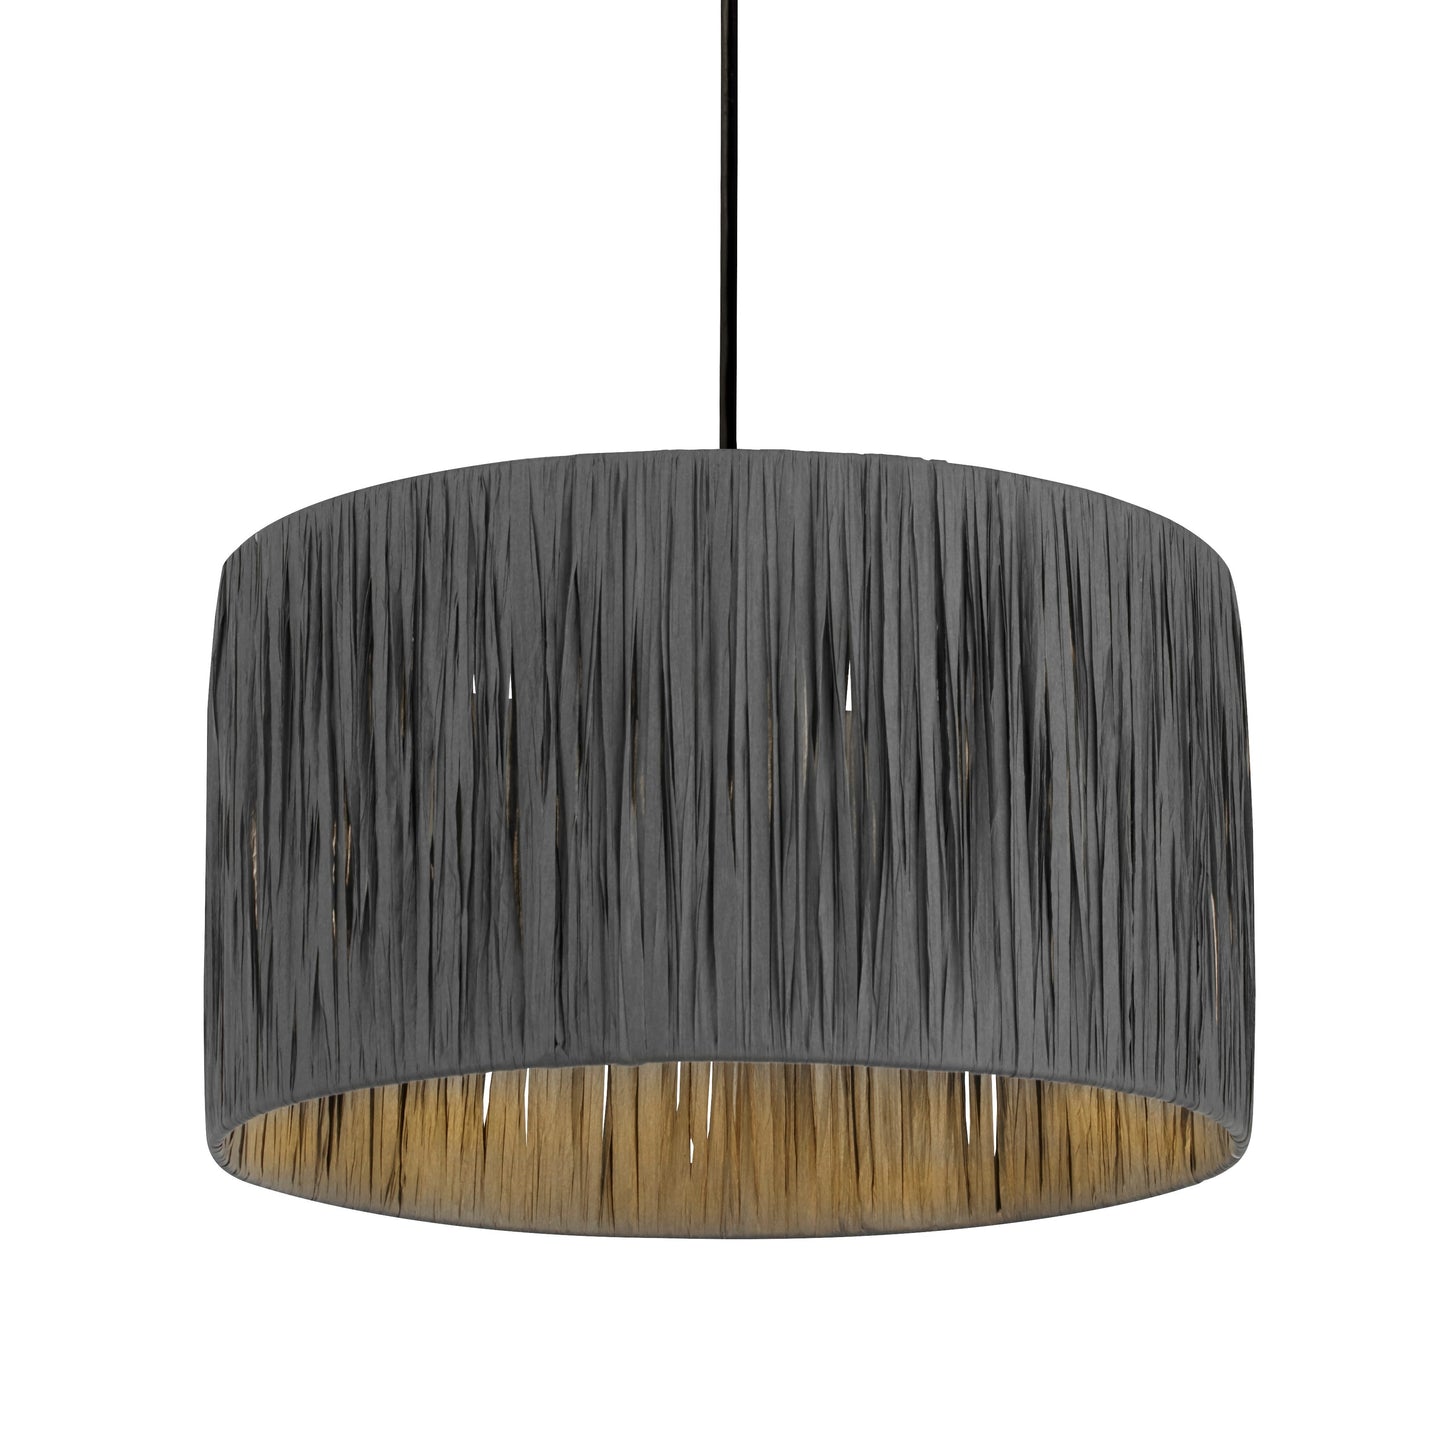 Our Rafi luxury taupe raffia pleated lamp shade is simple yet effective in appearance and we have designed the shade to suit a range of interiors. Easy to fit, it’s crafted from high-quality taupe pleated raffia when lit the light beams through creating a beautiful effect. It has been made to fit both a ceiling light or lamp base.